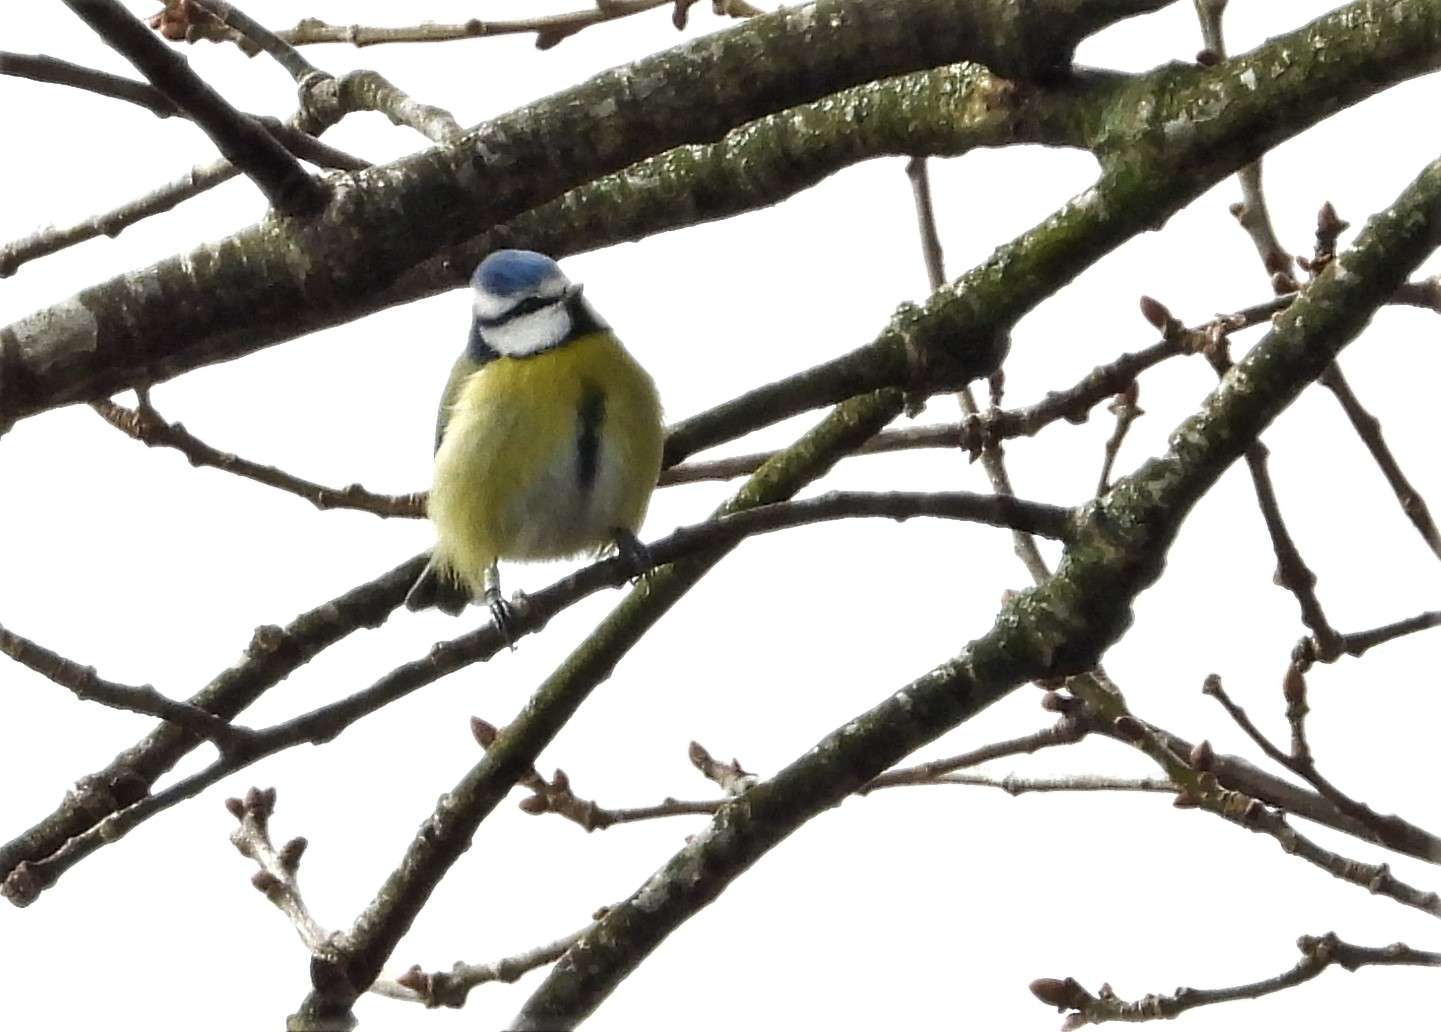 Blue Tit by Kenneth Bradley at Combe cellars